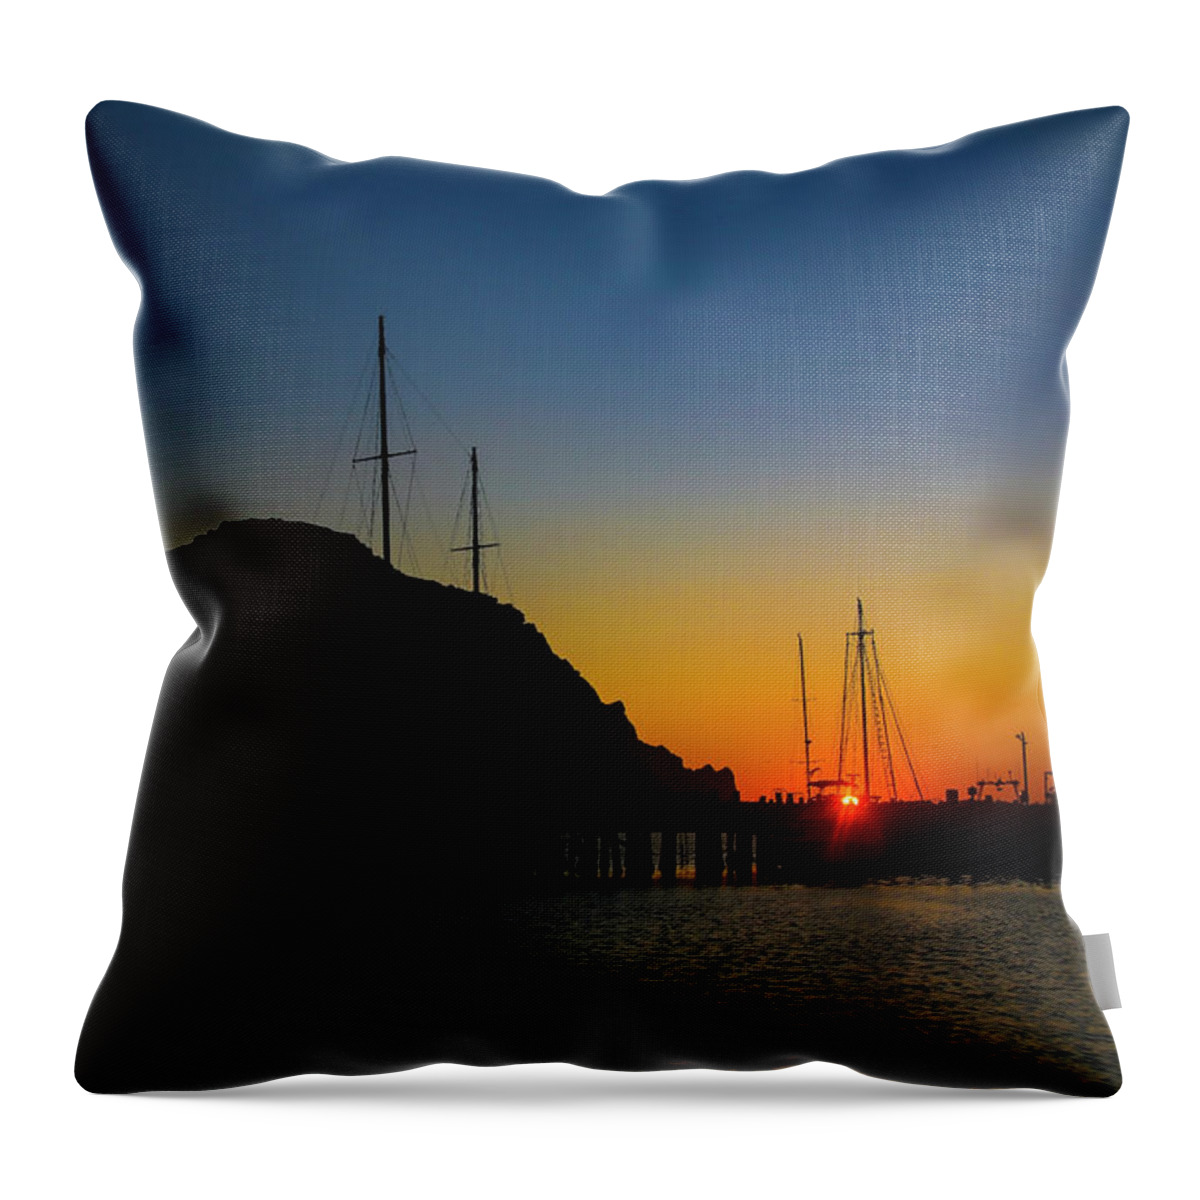 Sunset Morro Bay Throw Pillow featuring the photograph End Of The Day Morro Bay by Garry Gay